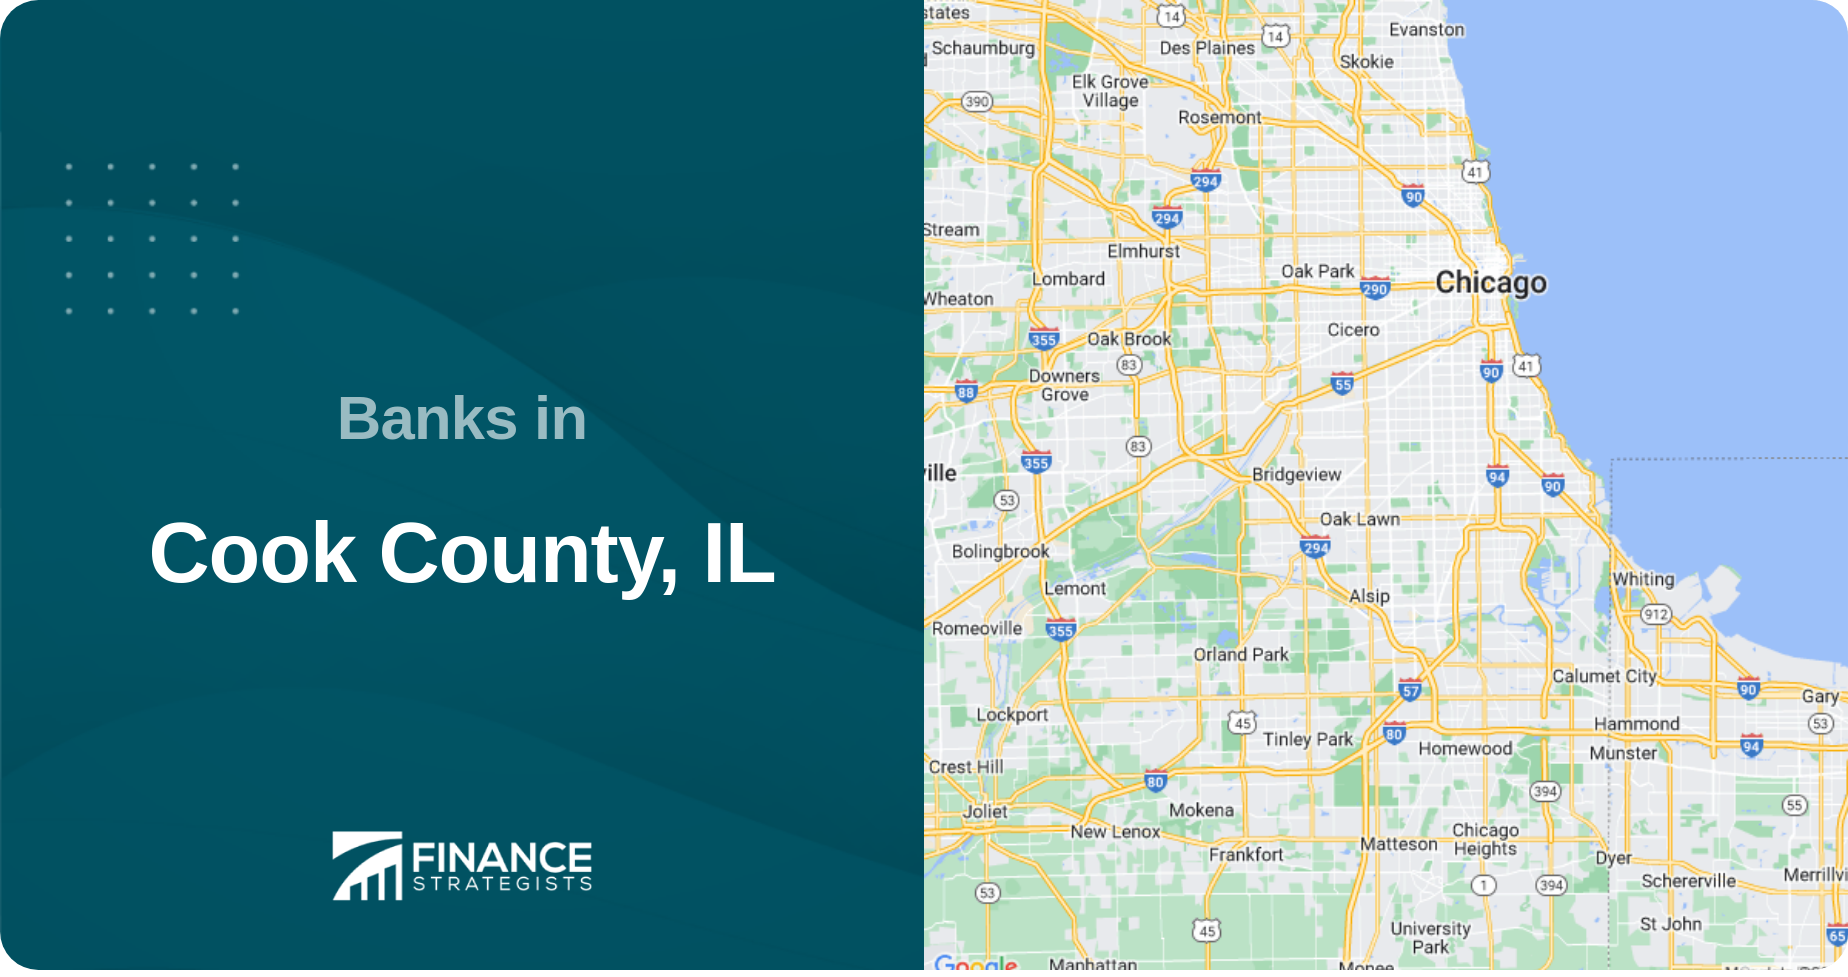 Banks in Cook County, IL